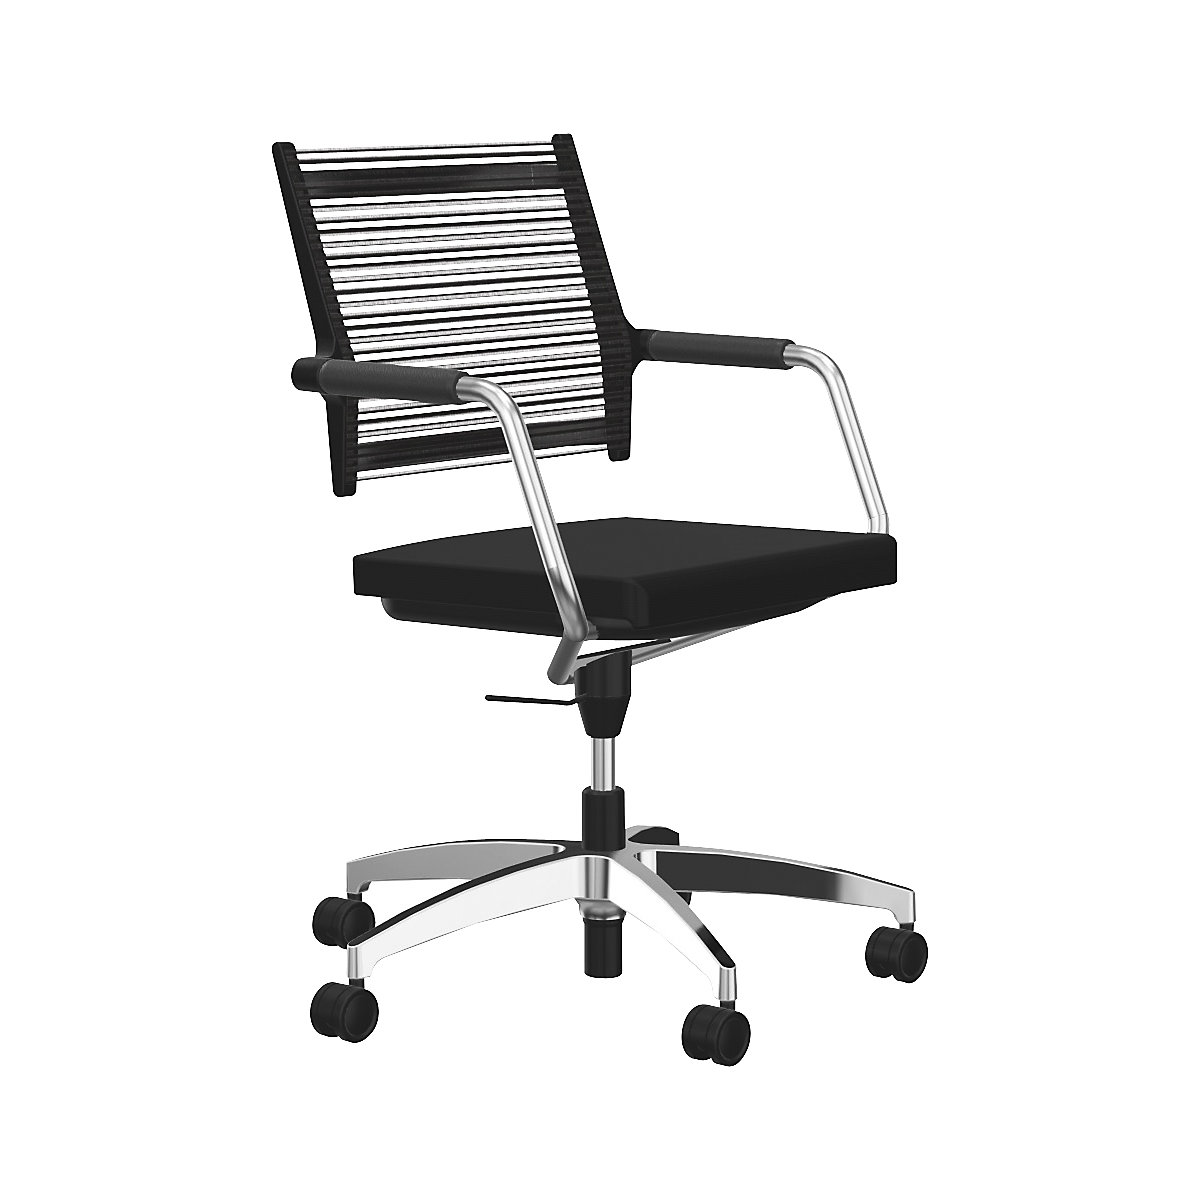 LORDO conference swivel chair - Dauphin